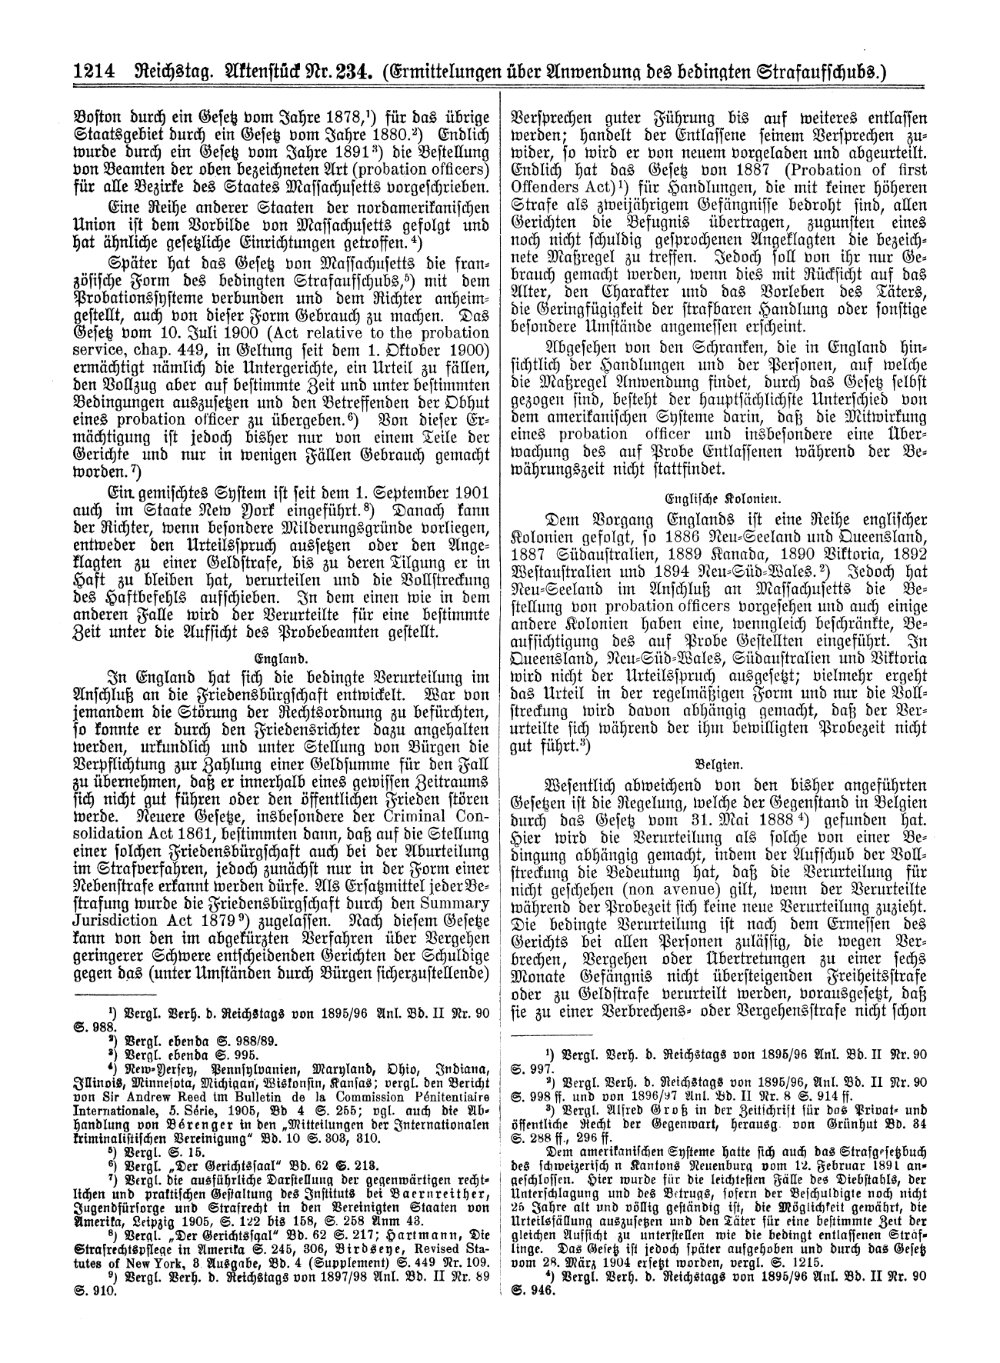 Scan of page 1214